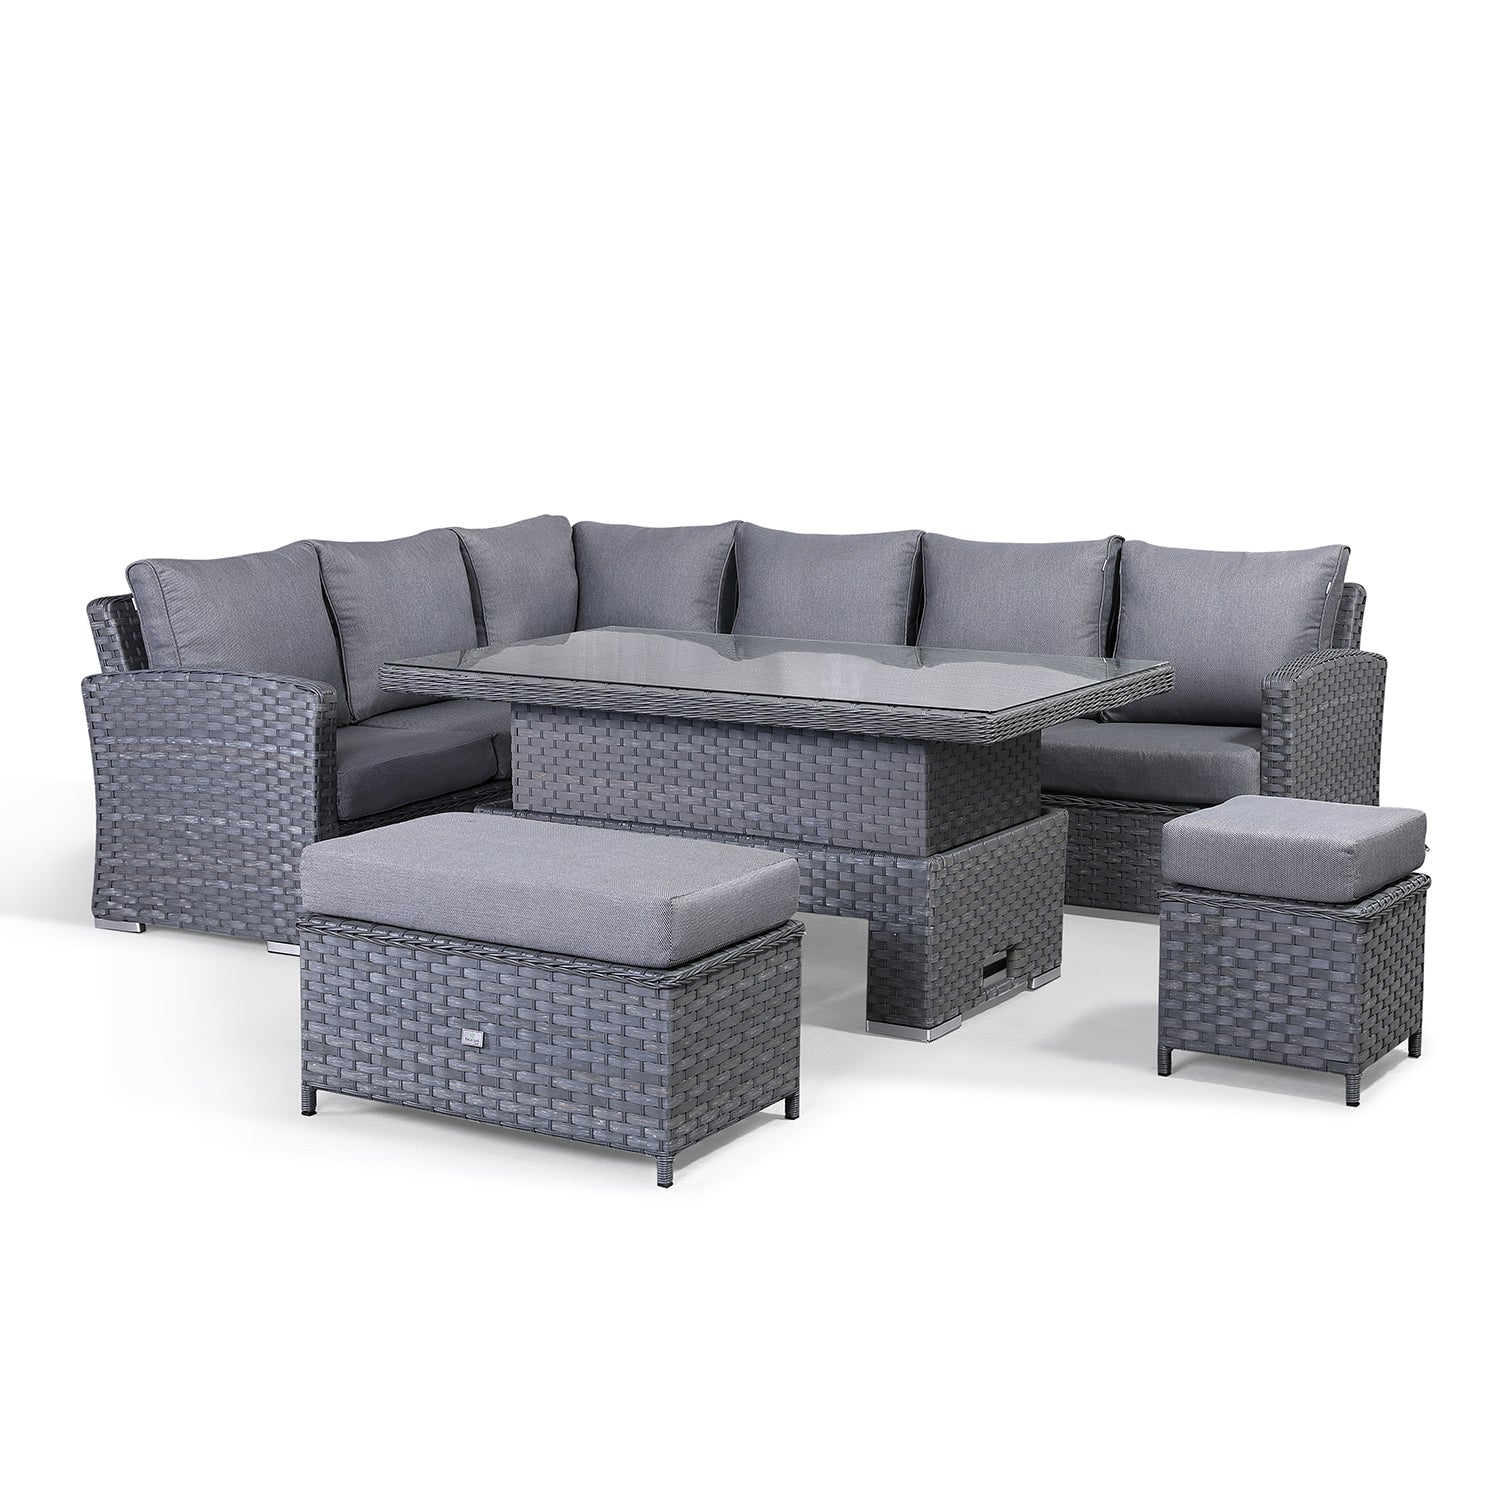 Replacement Cushion Covers in Grey for Victoria High Back Large MODULAR Corner Sofa Set ONLY